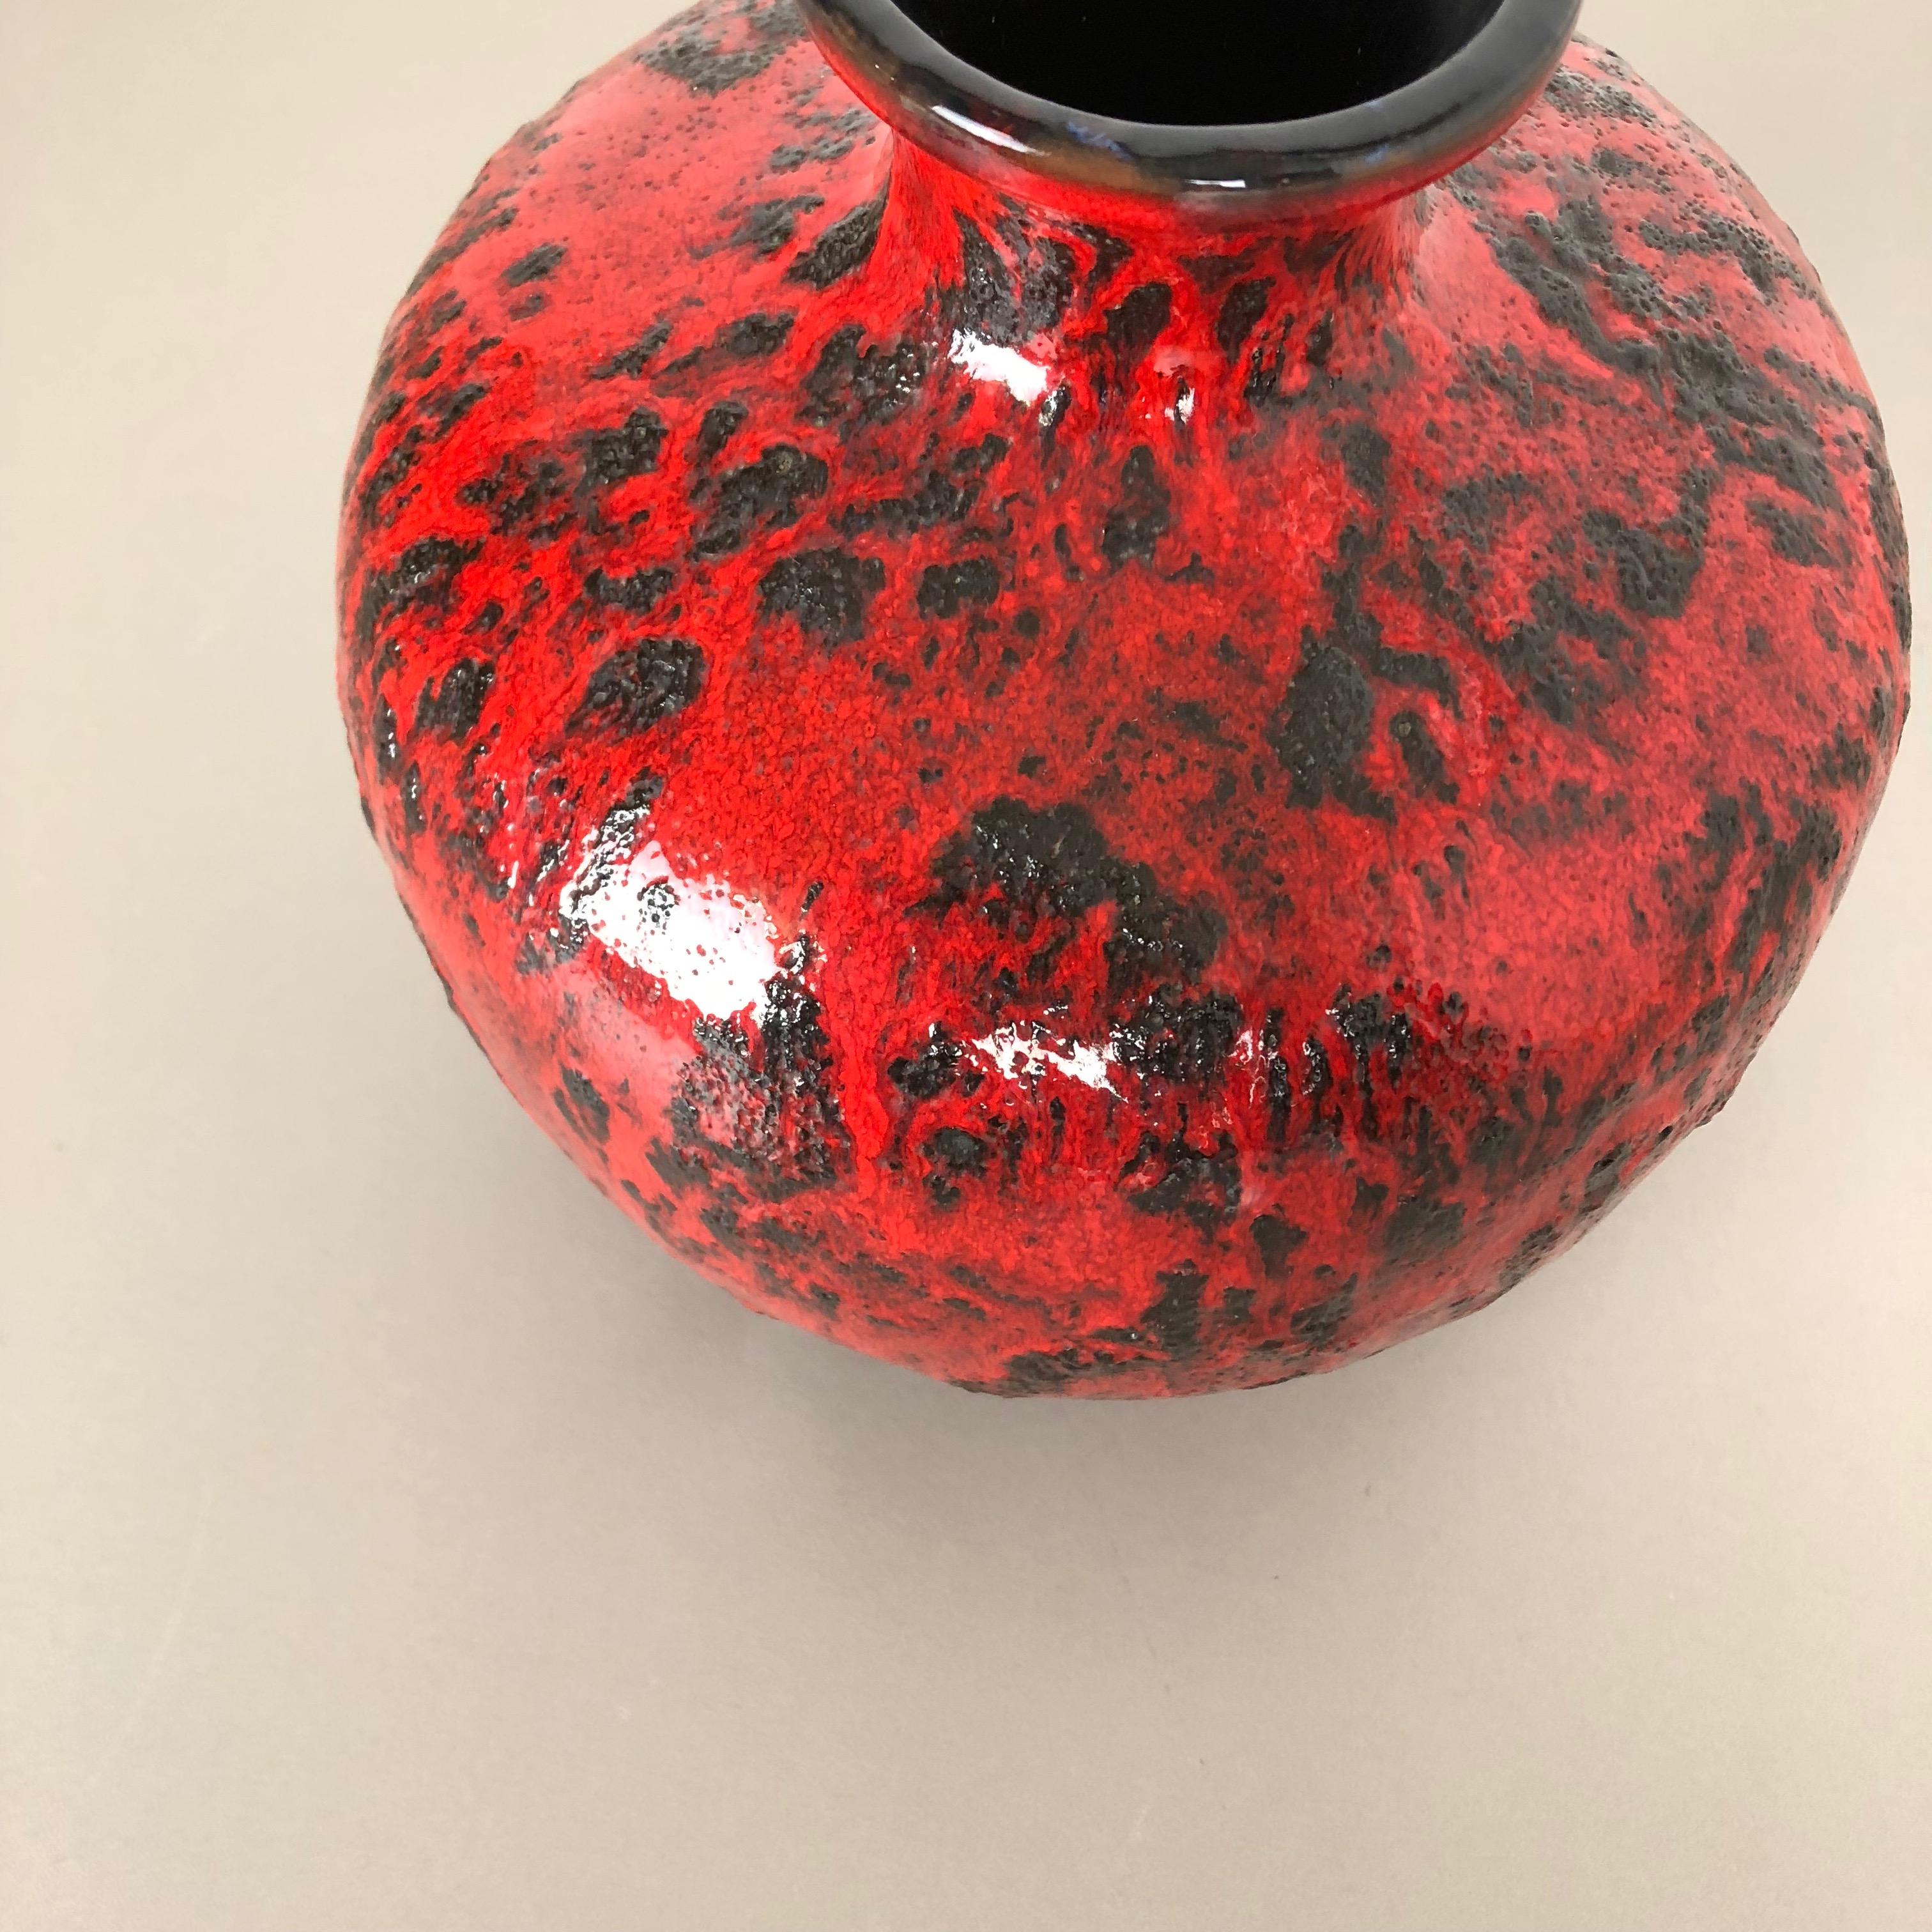 Mid-Century Modern Super Colorful Fat Lava Pottery Vase by Gräflich Ortenburg, Germany, 1960s For Sale